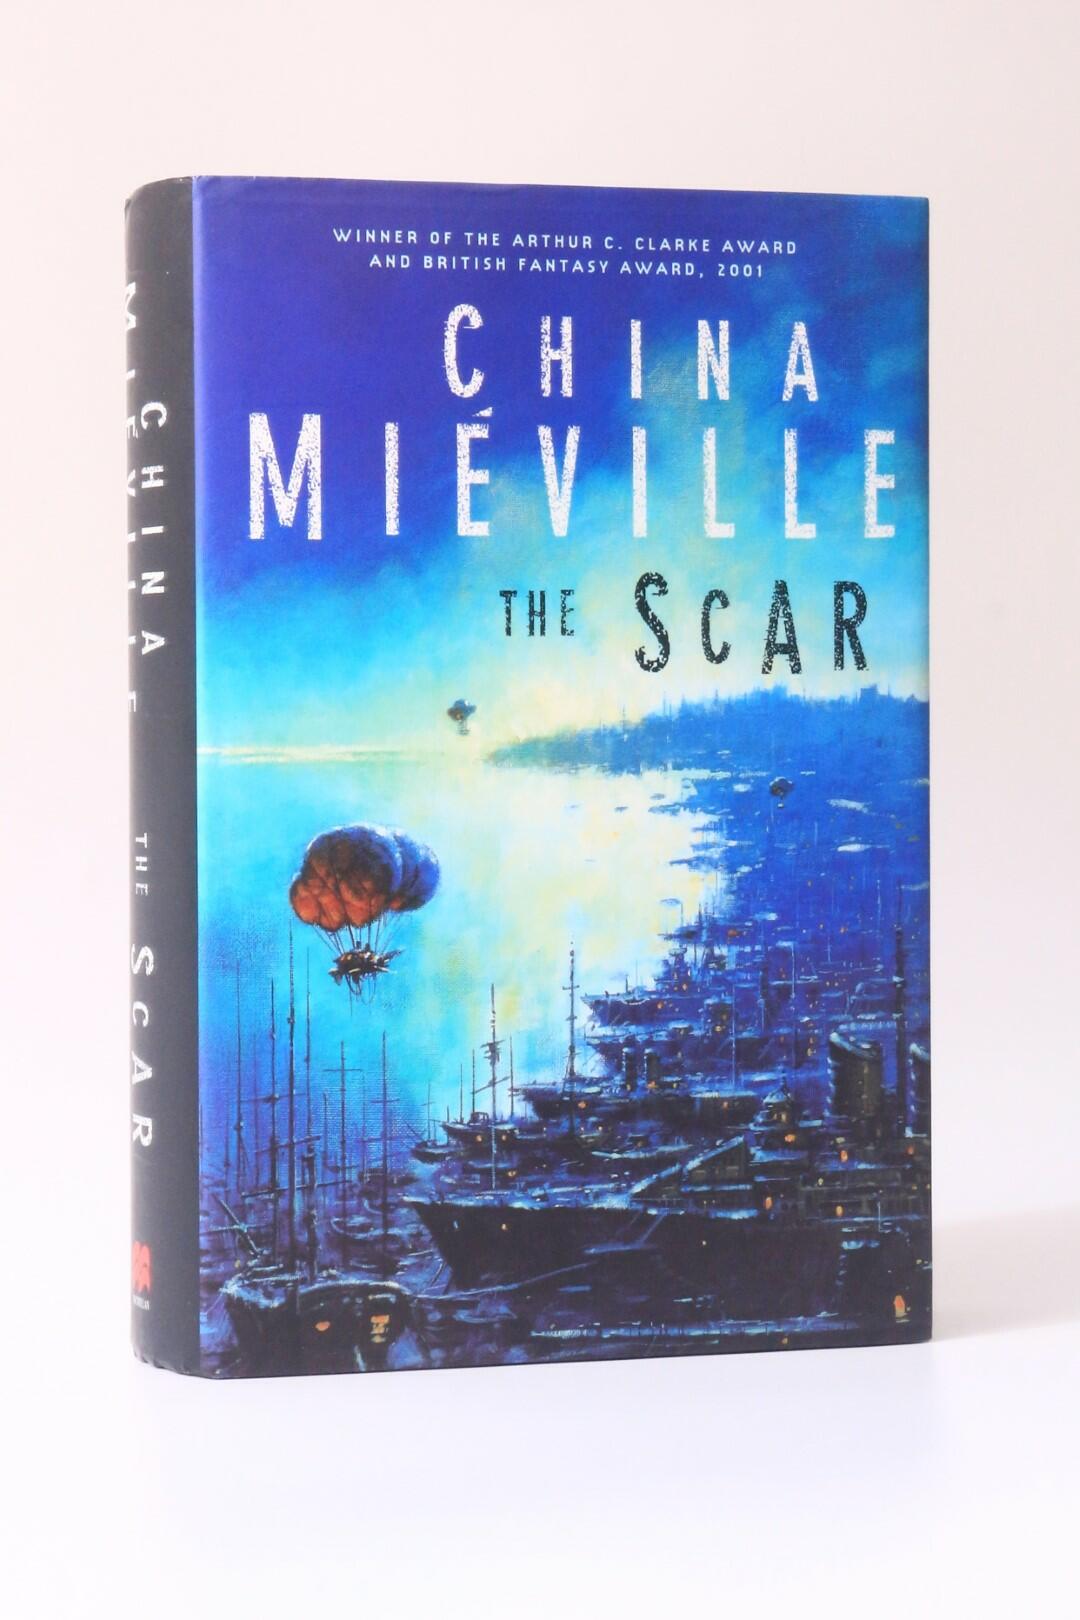 China Mieville - The Scar - Macmillan, 2002, First Edition.